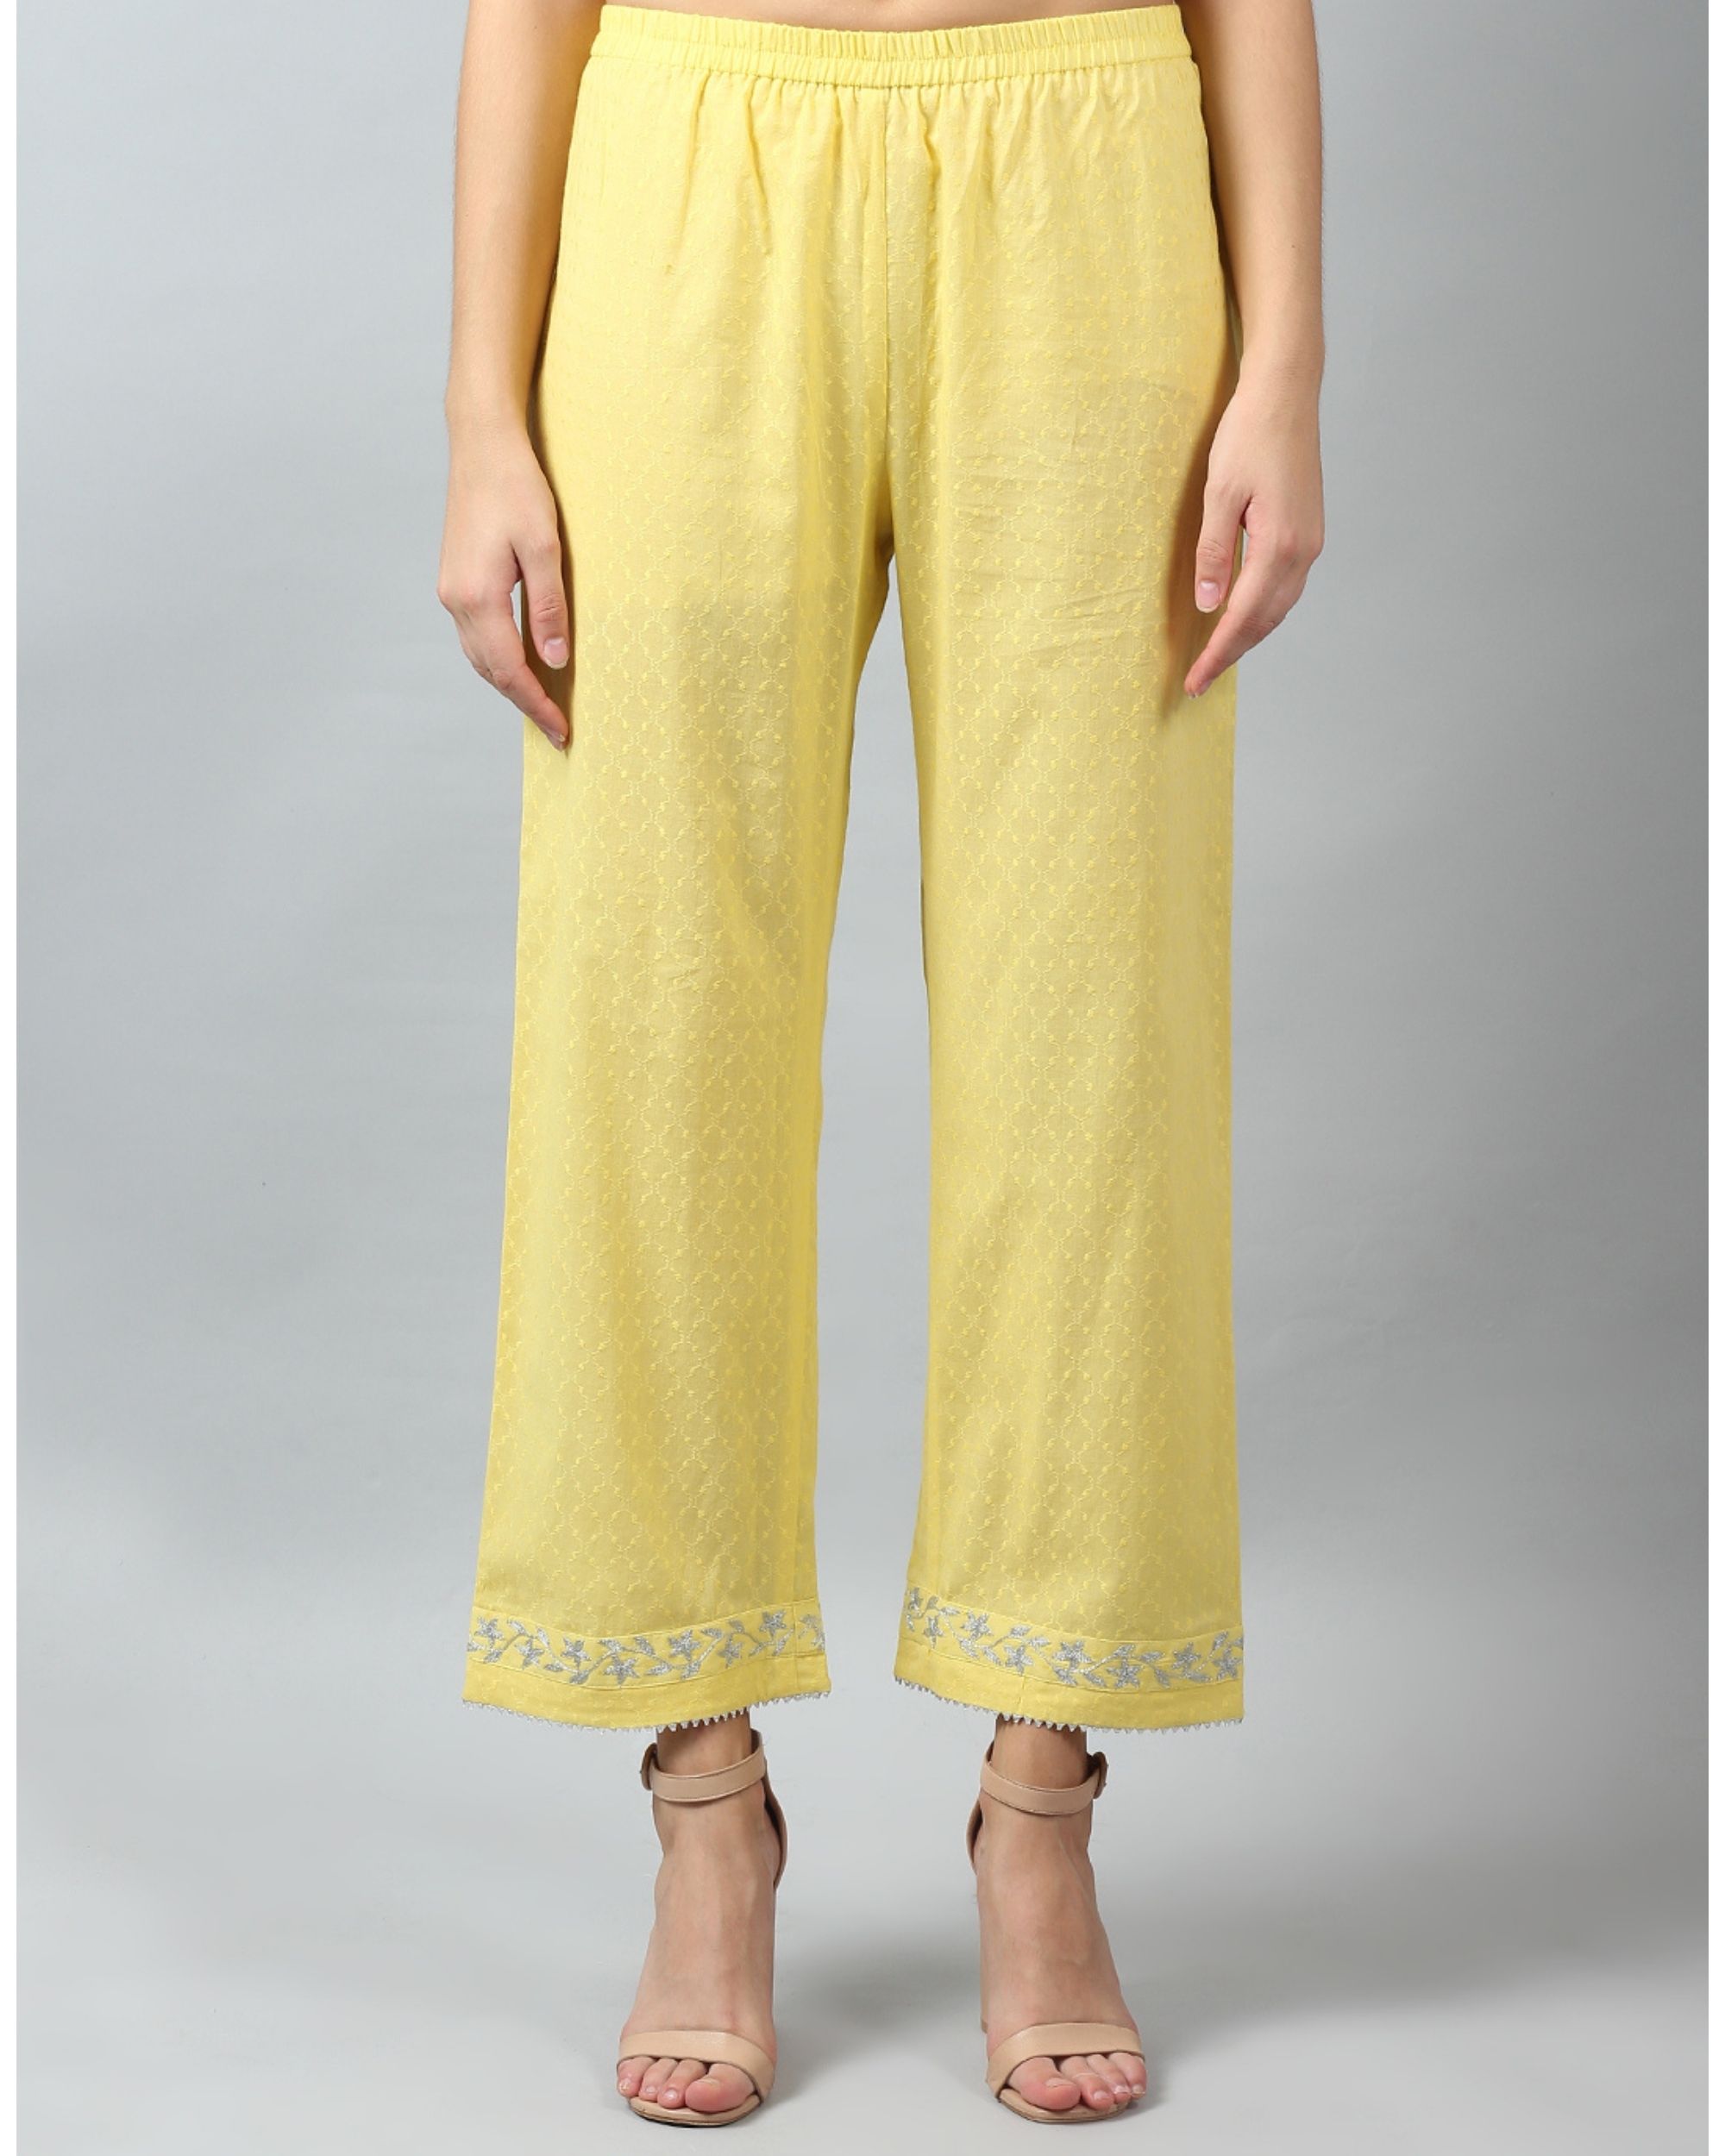 Buy White Yellow Cotton Stripe Regular Pant for Best Price, Reviews, Free  Shipping